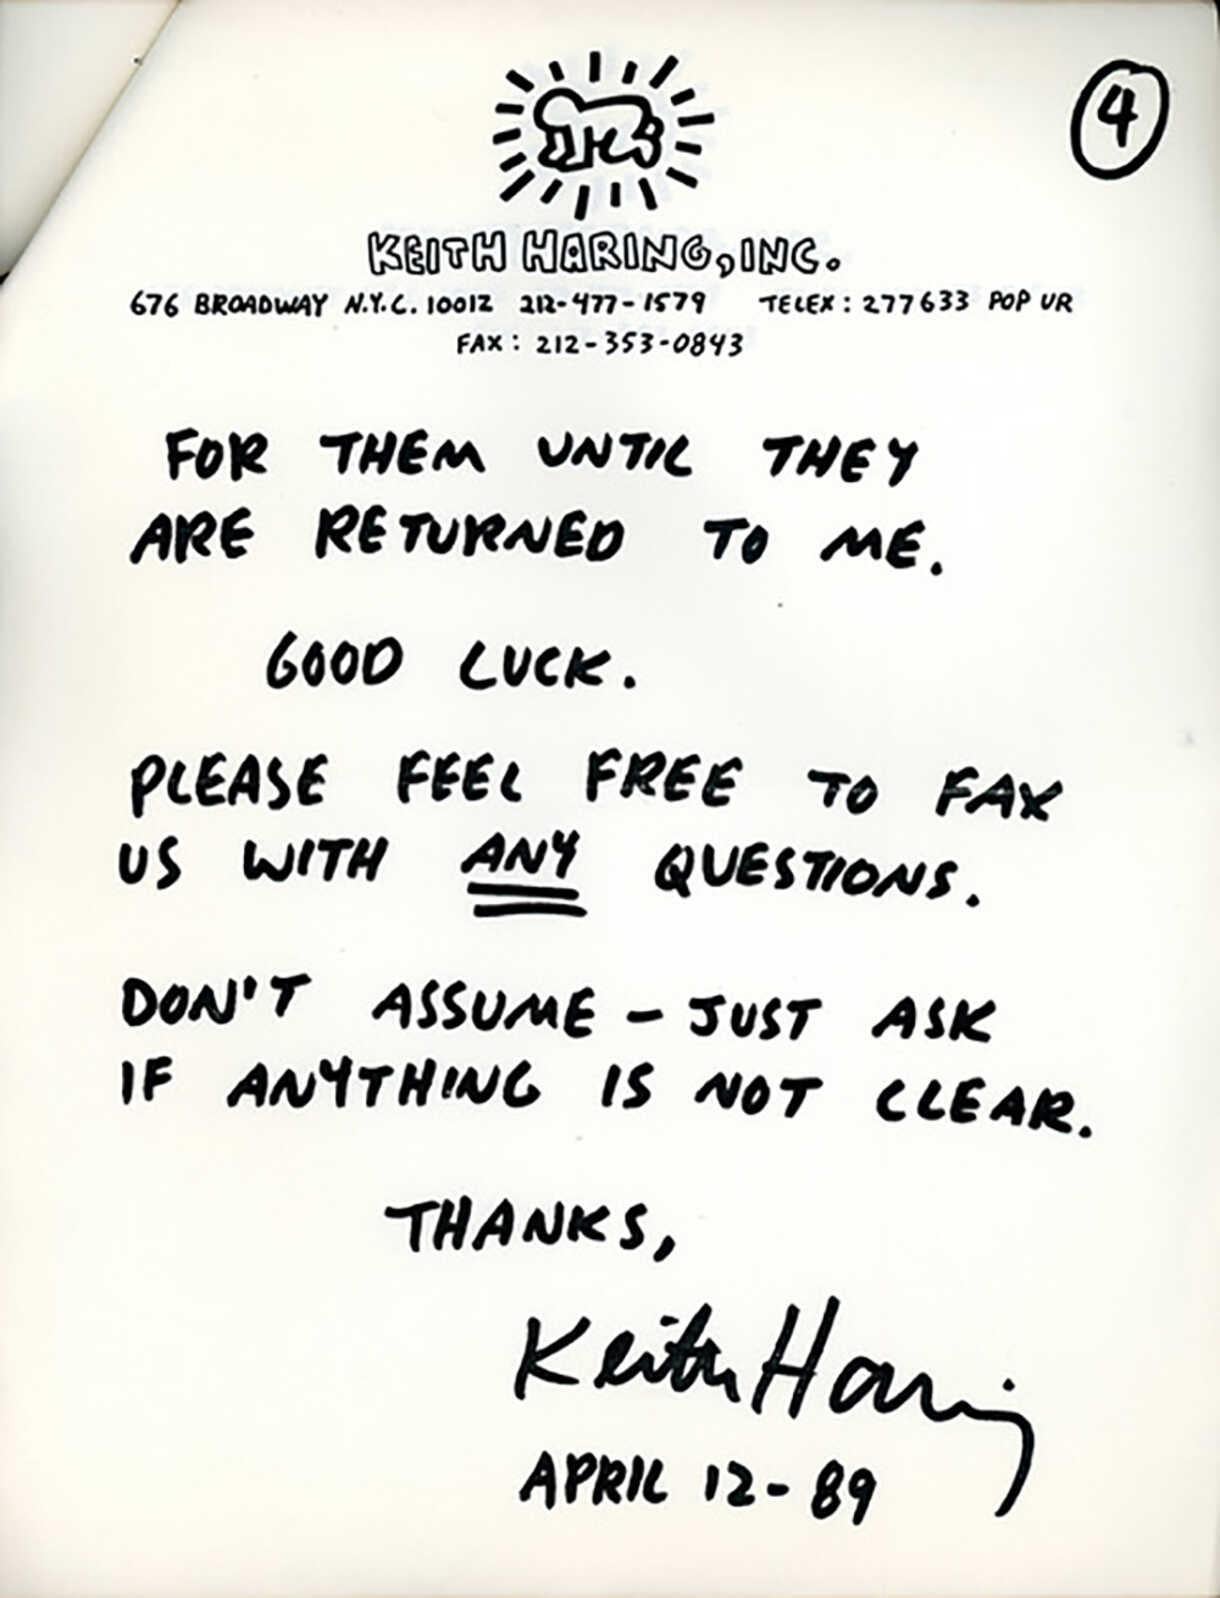 Keith Haring Eight Ball 1989:
This extremely rare 4 page printed/faxed document was created by Haring in 1988/1989, as a set of instructions to his publisher on “Eight Ball - Haring’s brilliantly rendered hardcover 1989 book. The instructions are